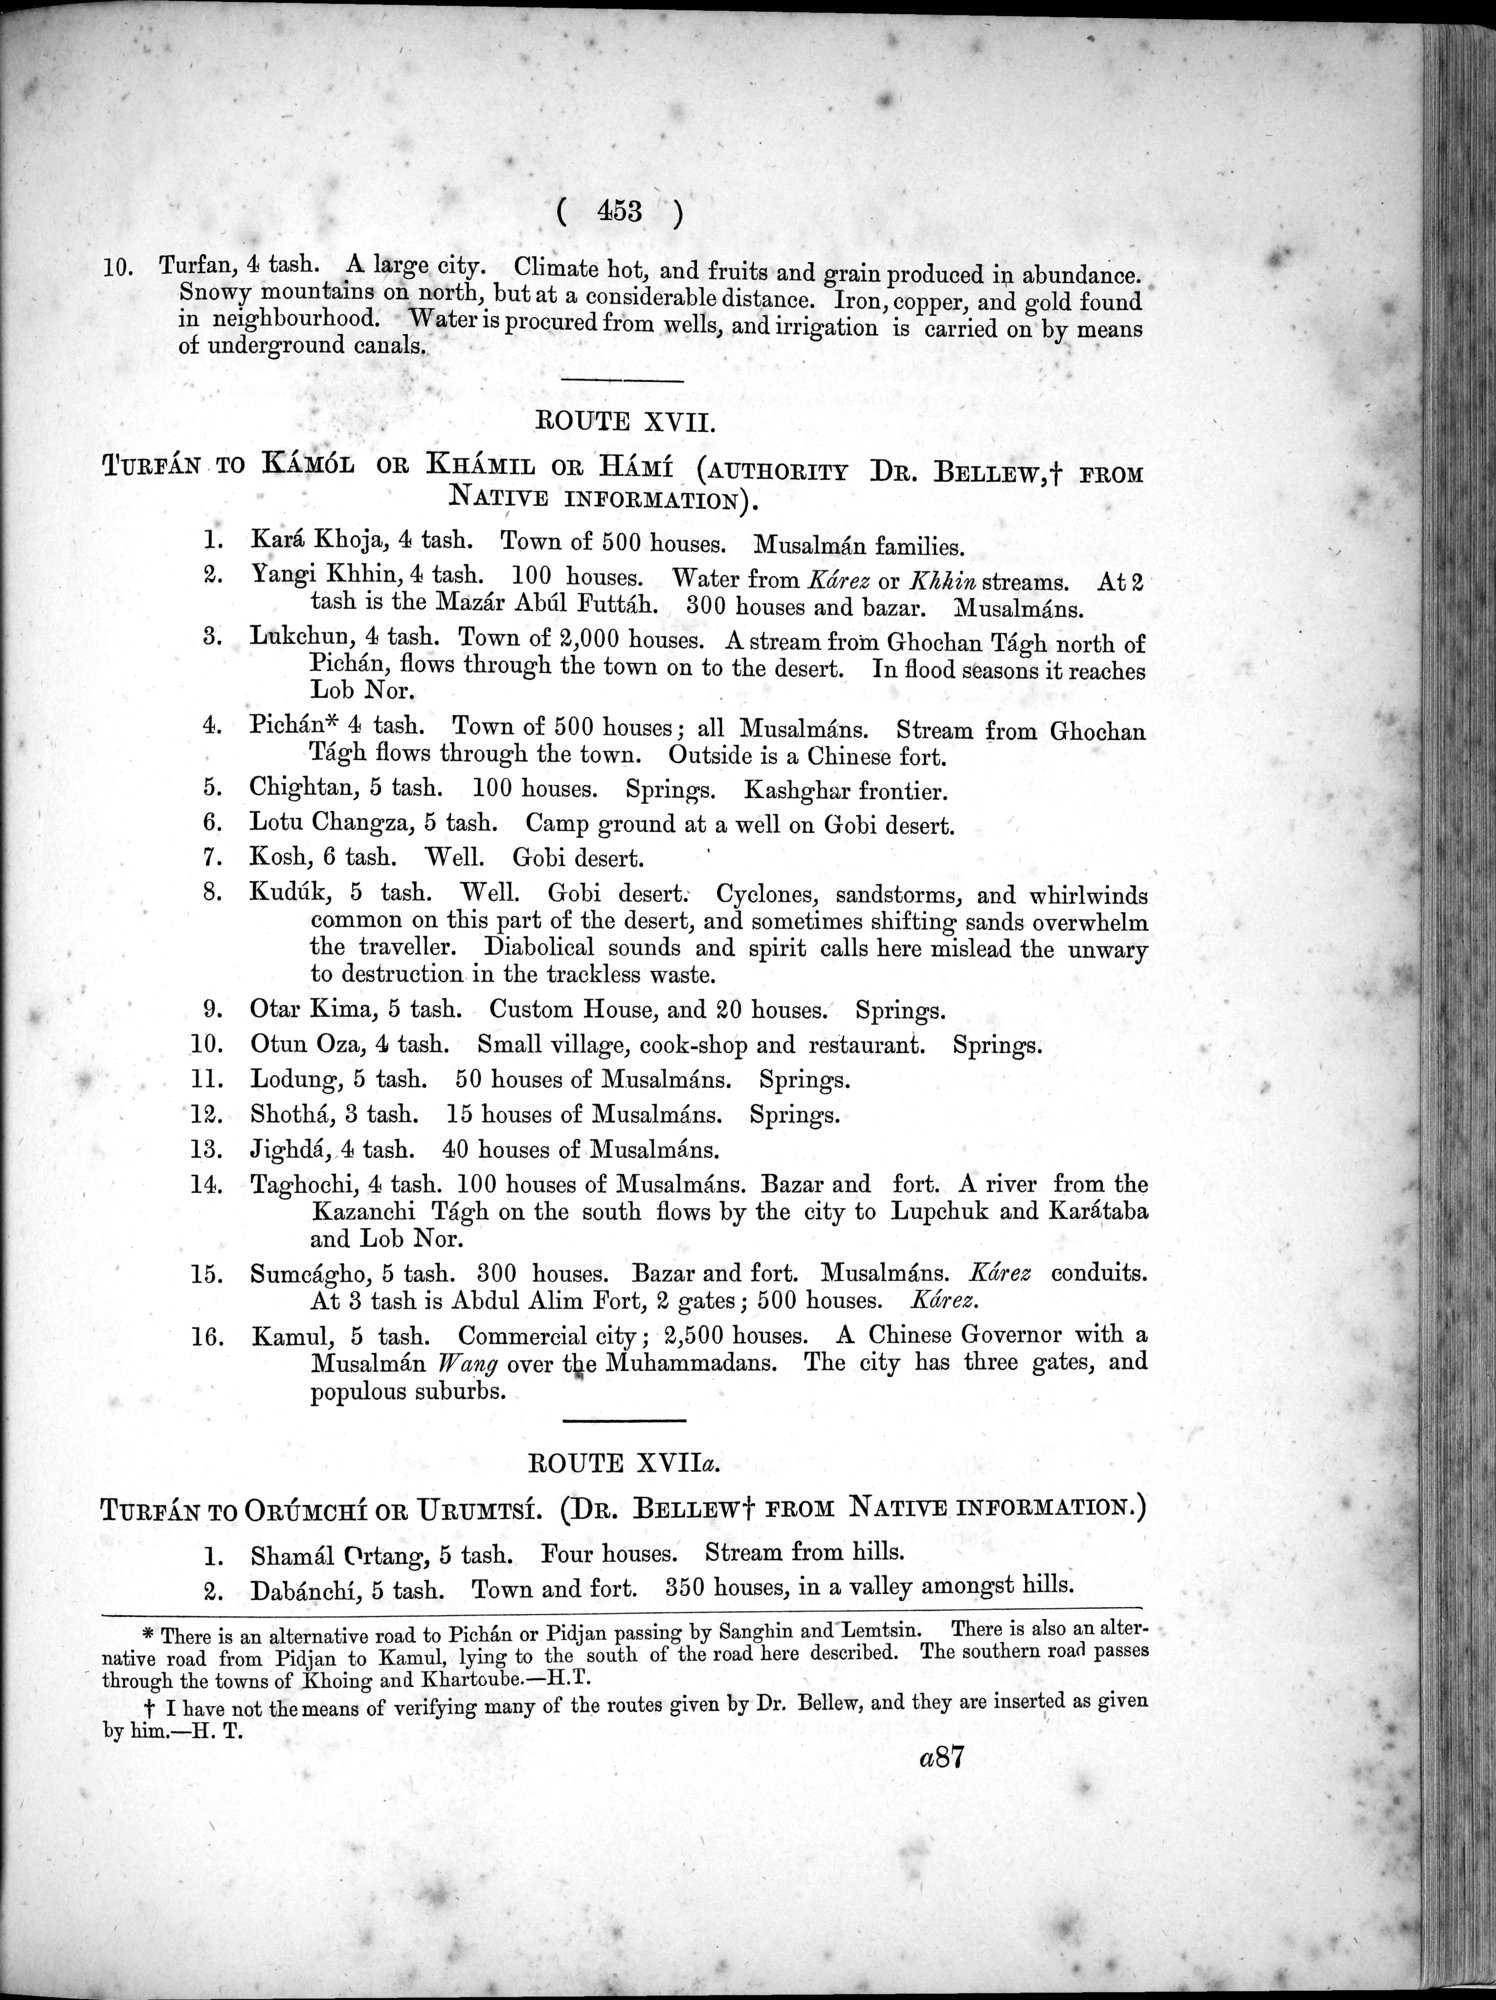 Report of a Mission to Yarkund in 1873 : vol.1 / Page 587 (Grayscale High Resolution Image)